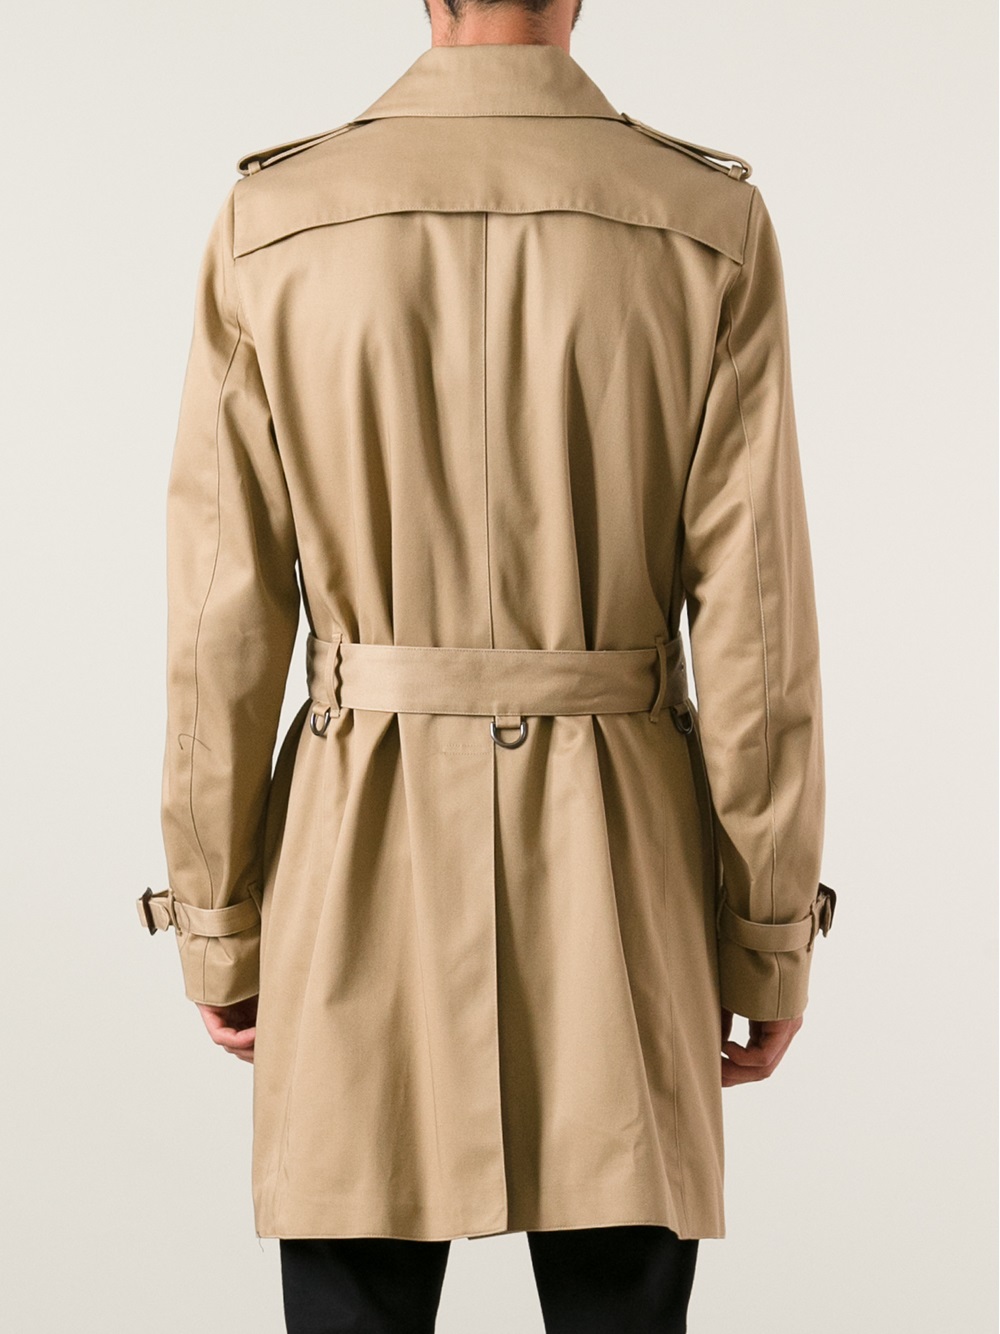 Paul Smith Paul Smith Trench Coat in Natural for Men - Lyst